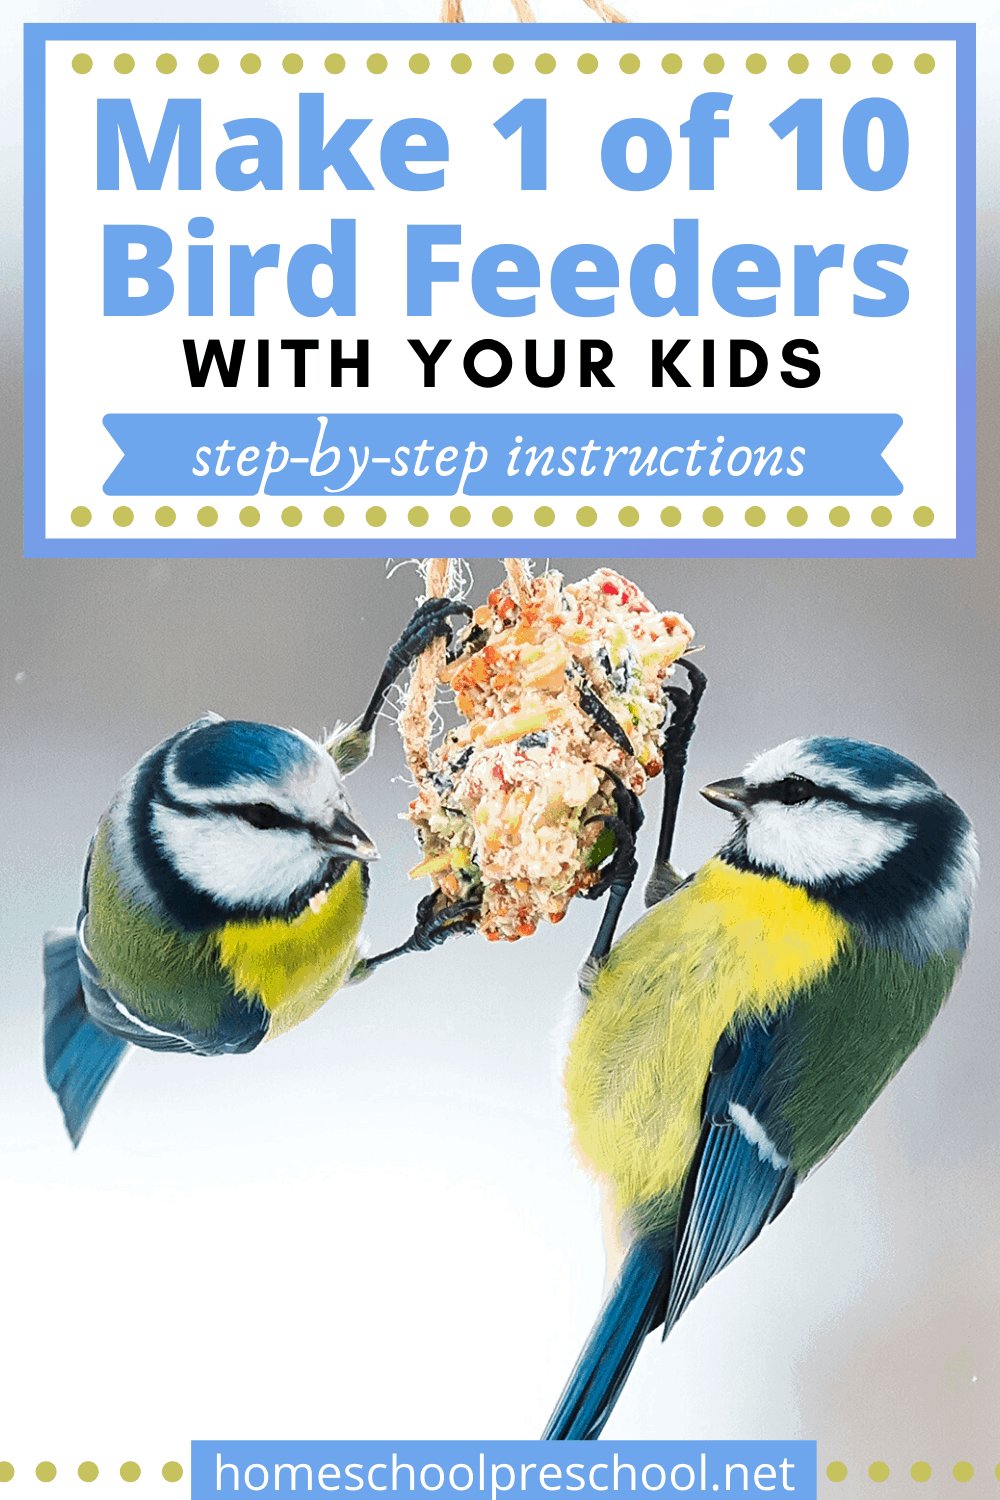 Discover a variety of simple bird feeders for preschoolers to make and hang in the trees. They'll love watching the birds flock to the yard.